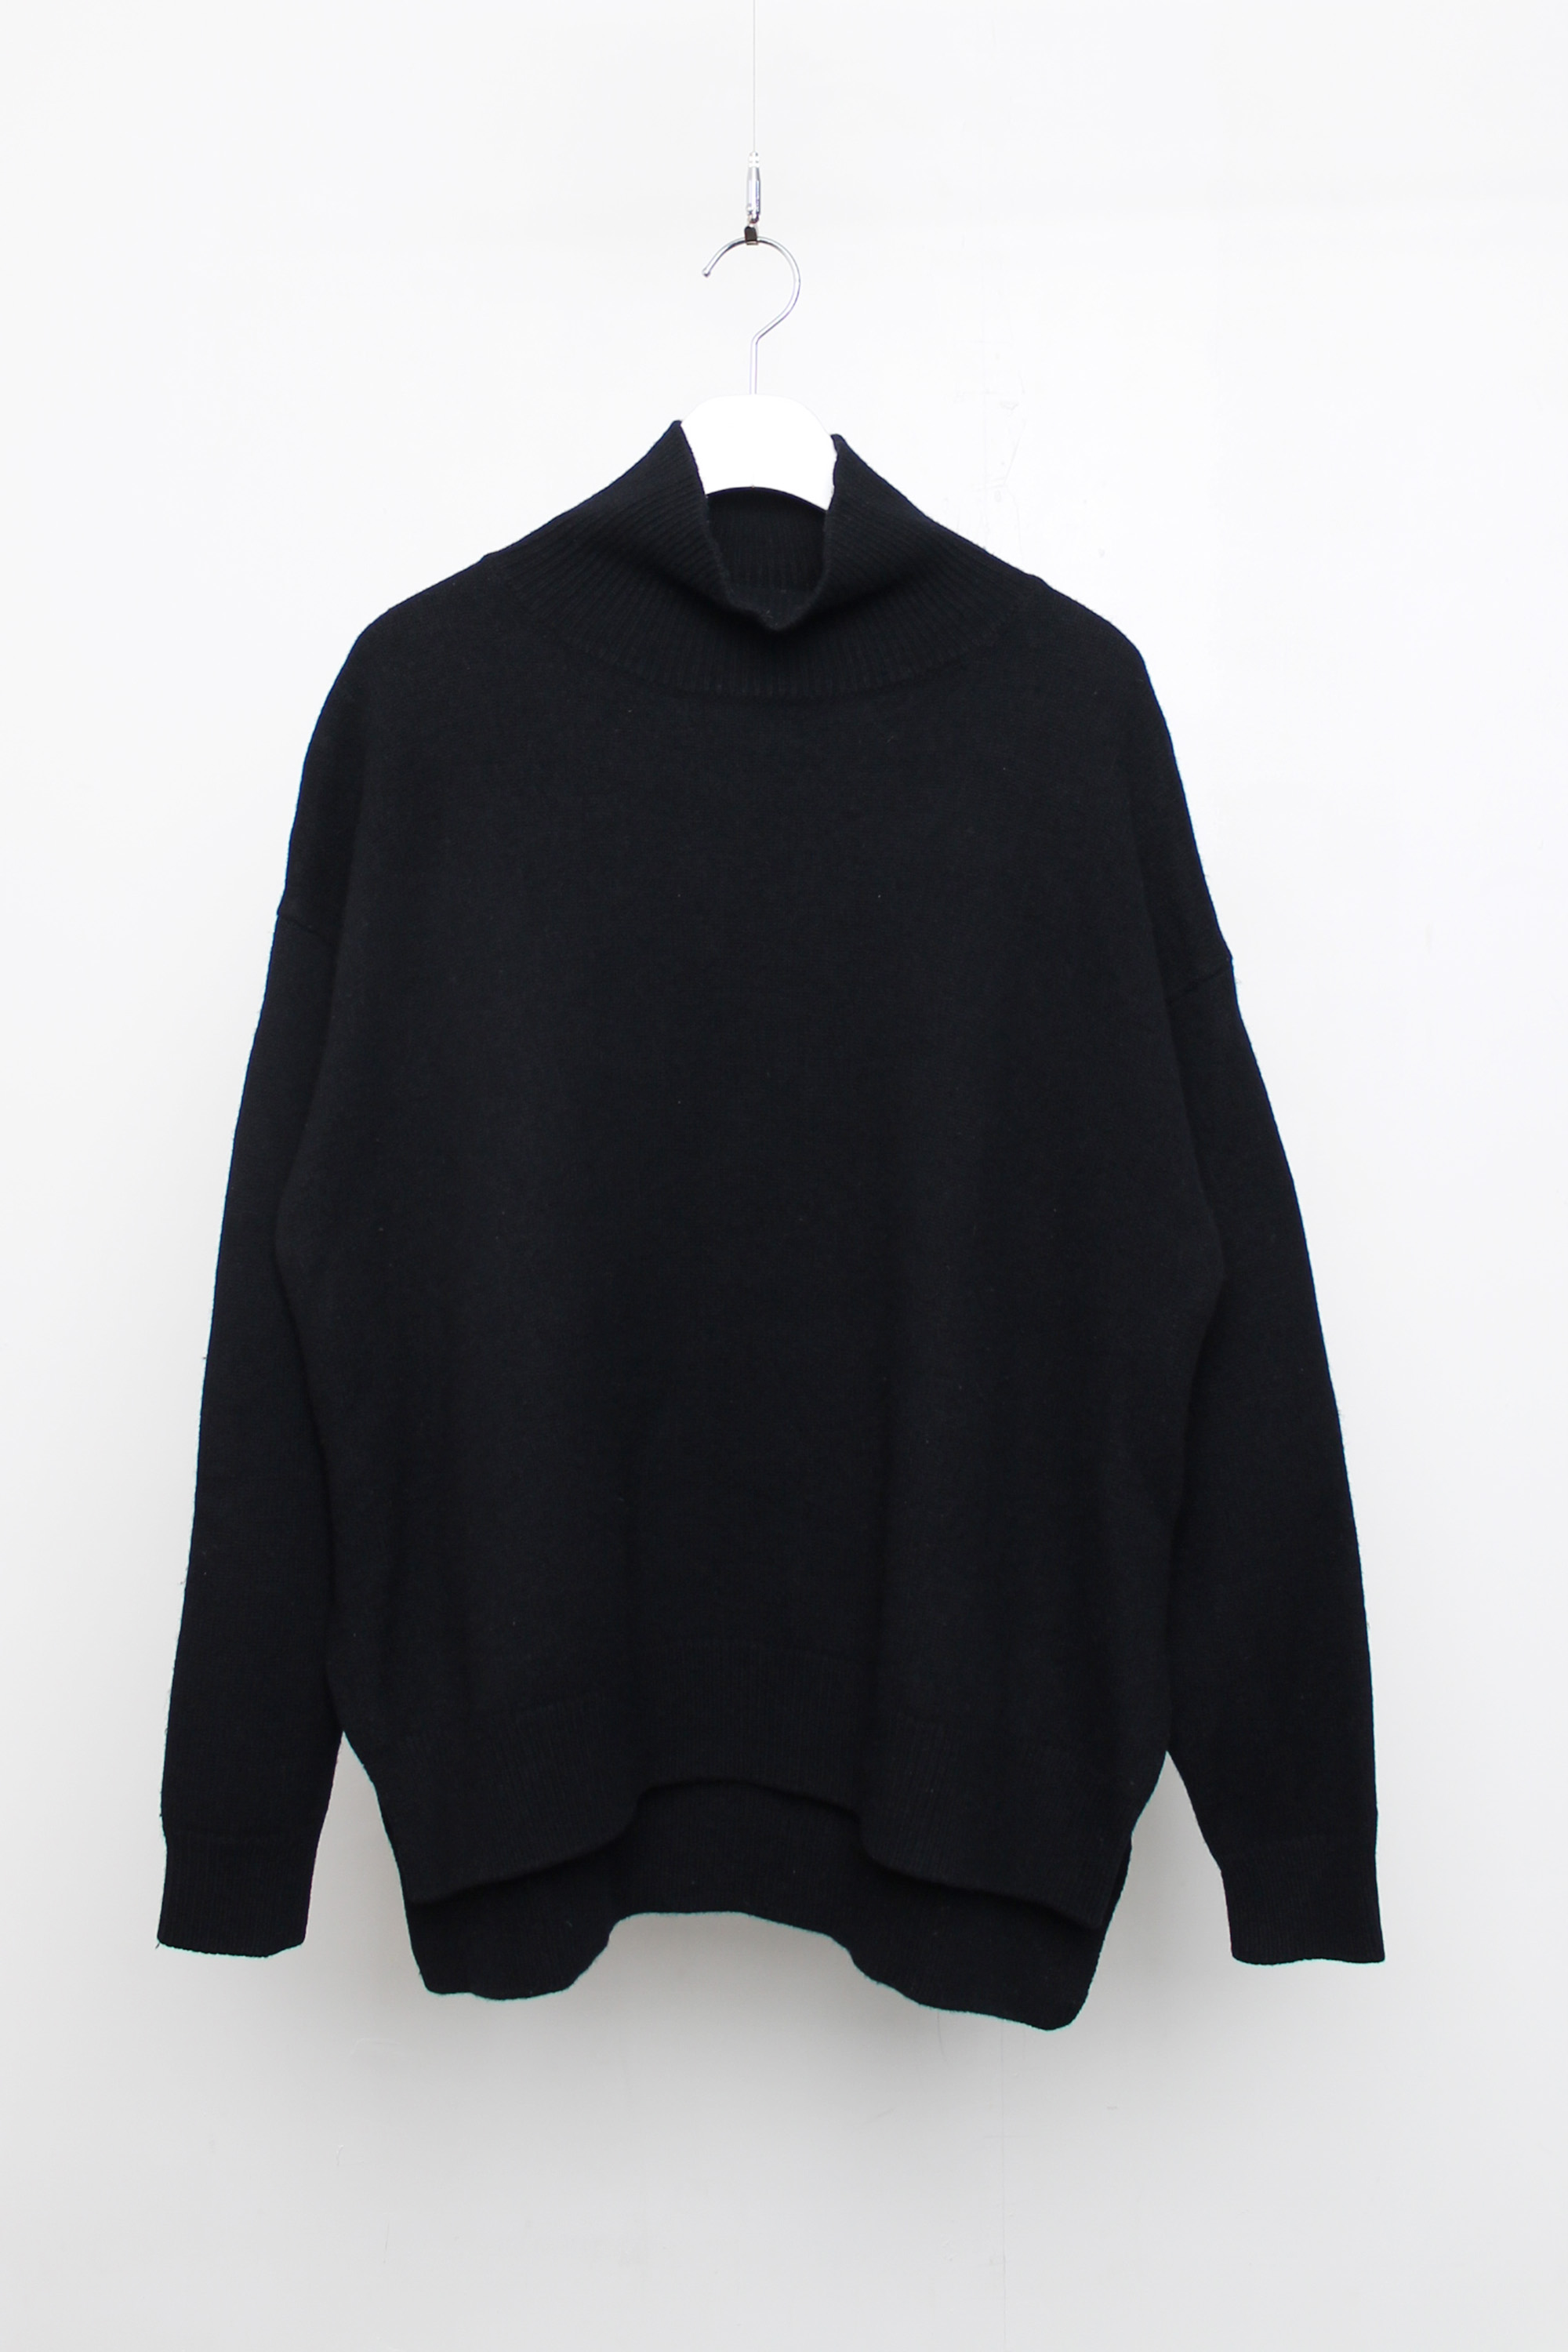 ENFOLD over knit